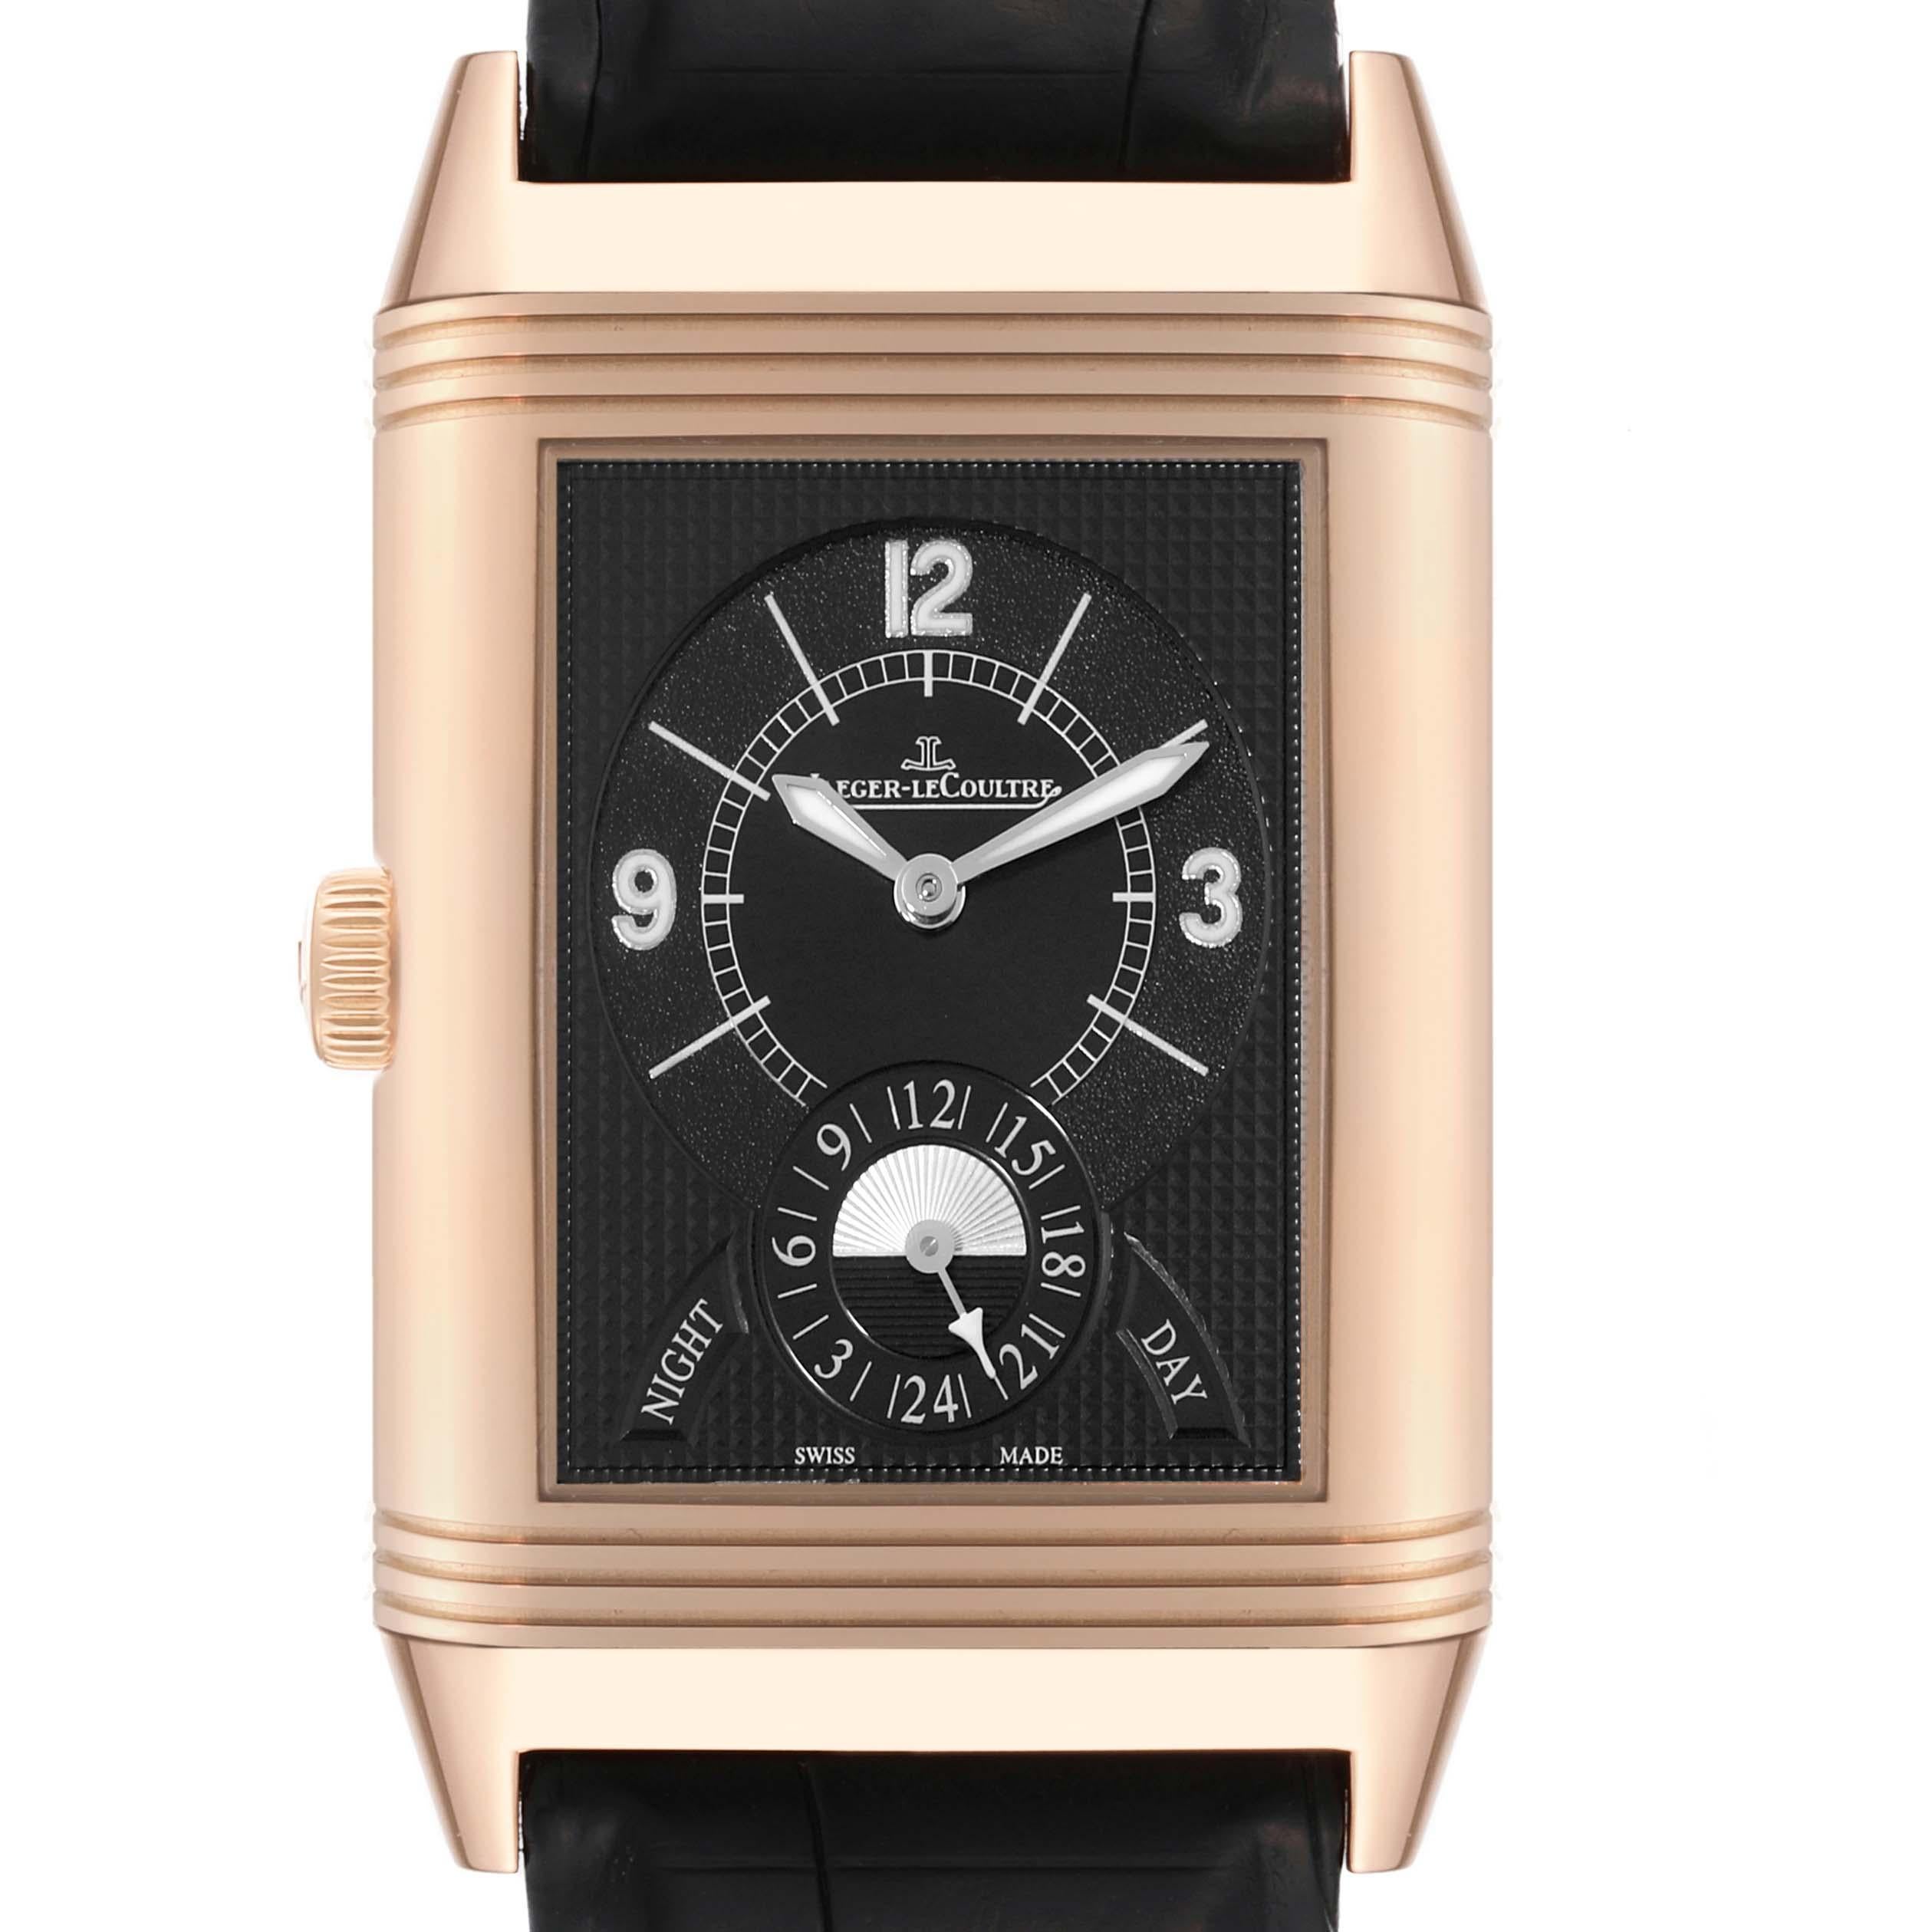 Jaeger LeCoultre Grande Reverse Rose Gold Mens Watch 273.2.85 Q3742421. Manual winding movement. 18K rose gold 48.5 mm x 30 mm rectangular case with reeded ends rotating within its back plate. 18K rose gold bezel. Scratch resistant sapphire crystal.